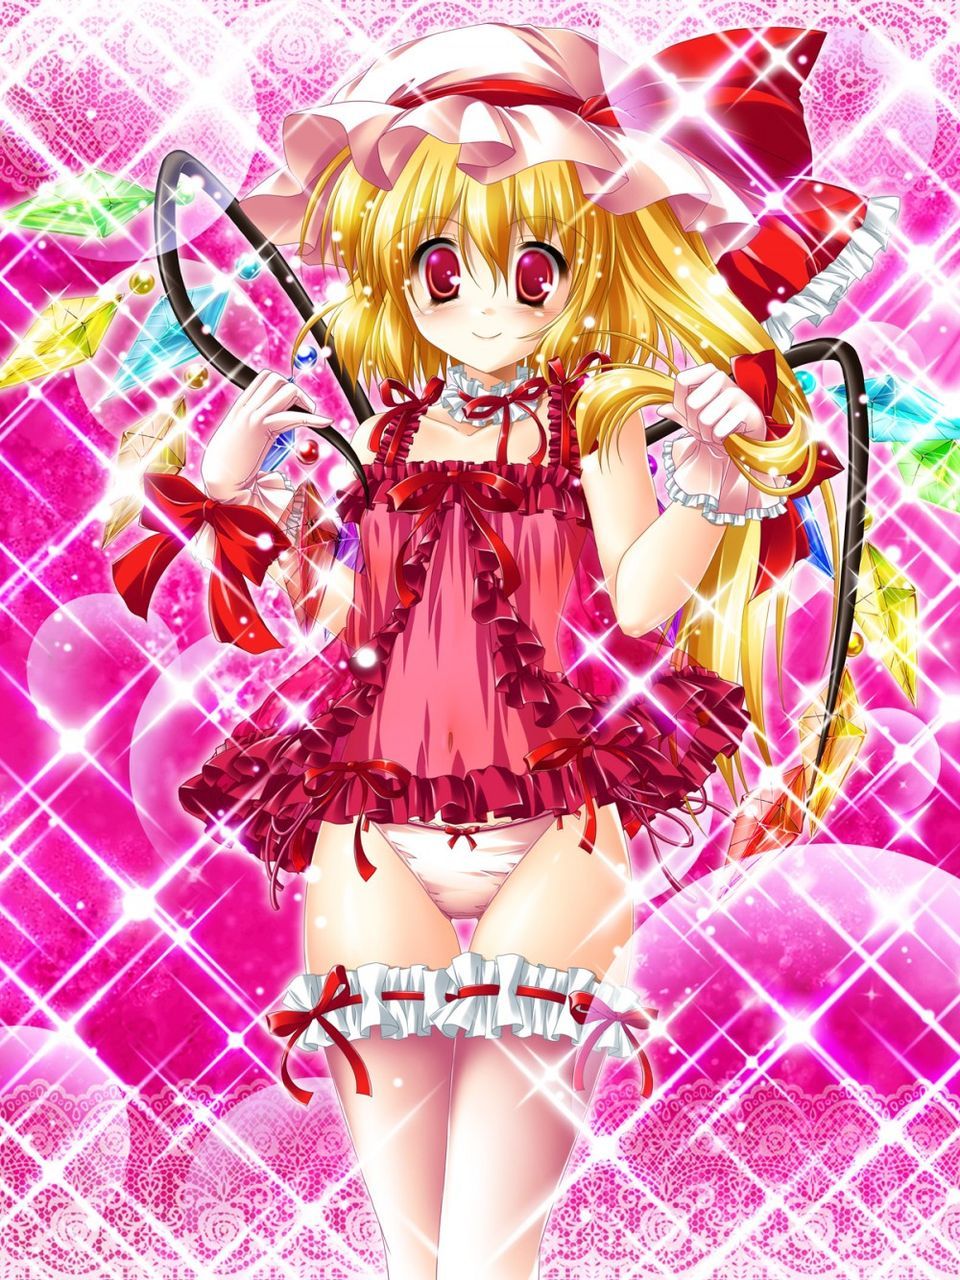 I tried to [touhou Project: Flandre Scarlet erotic pictures 7